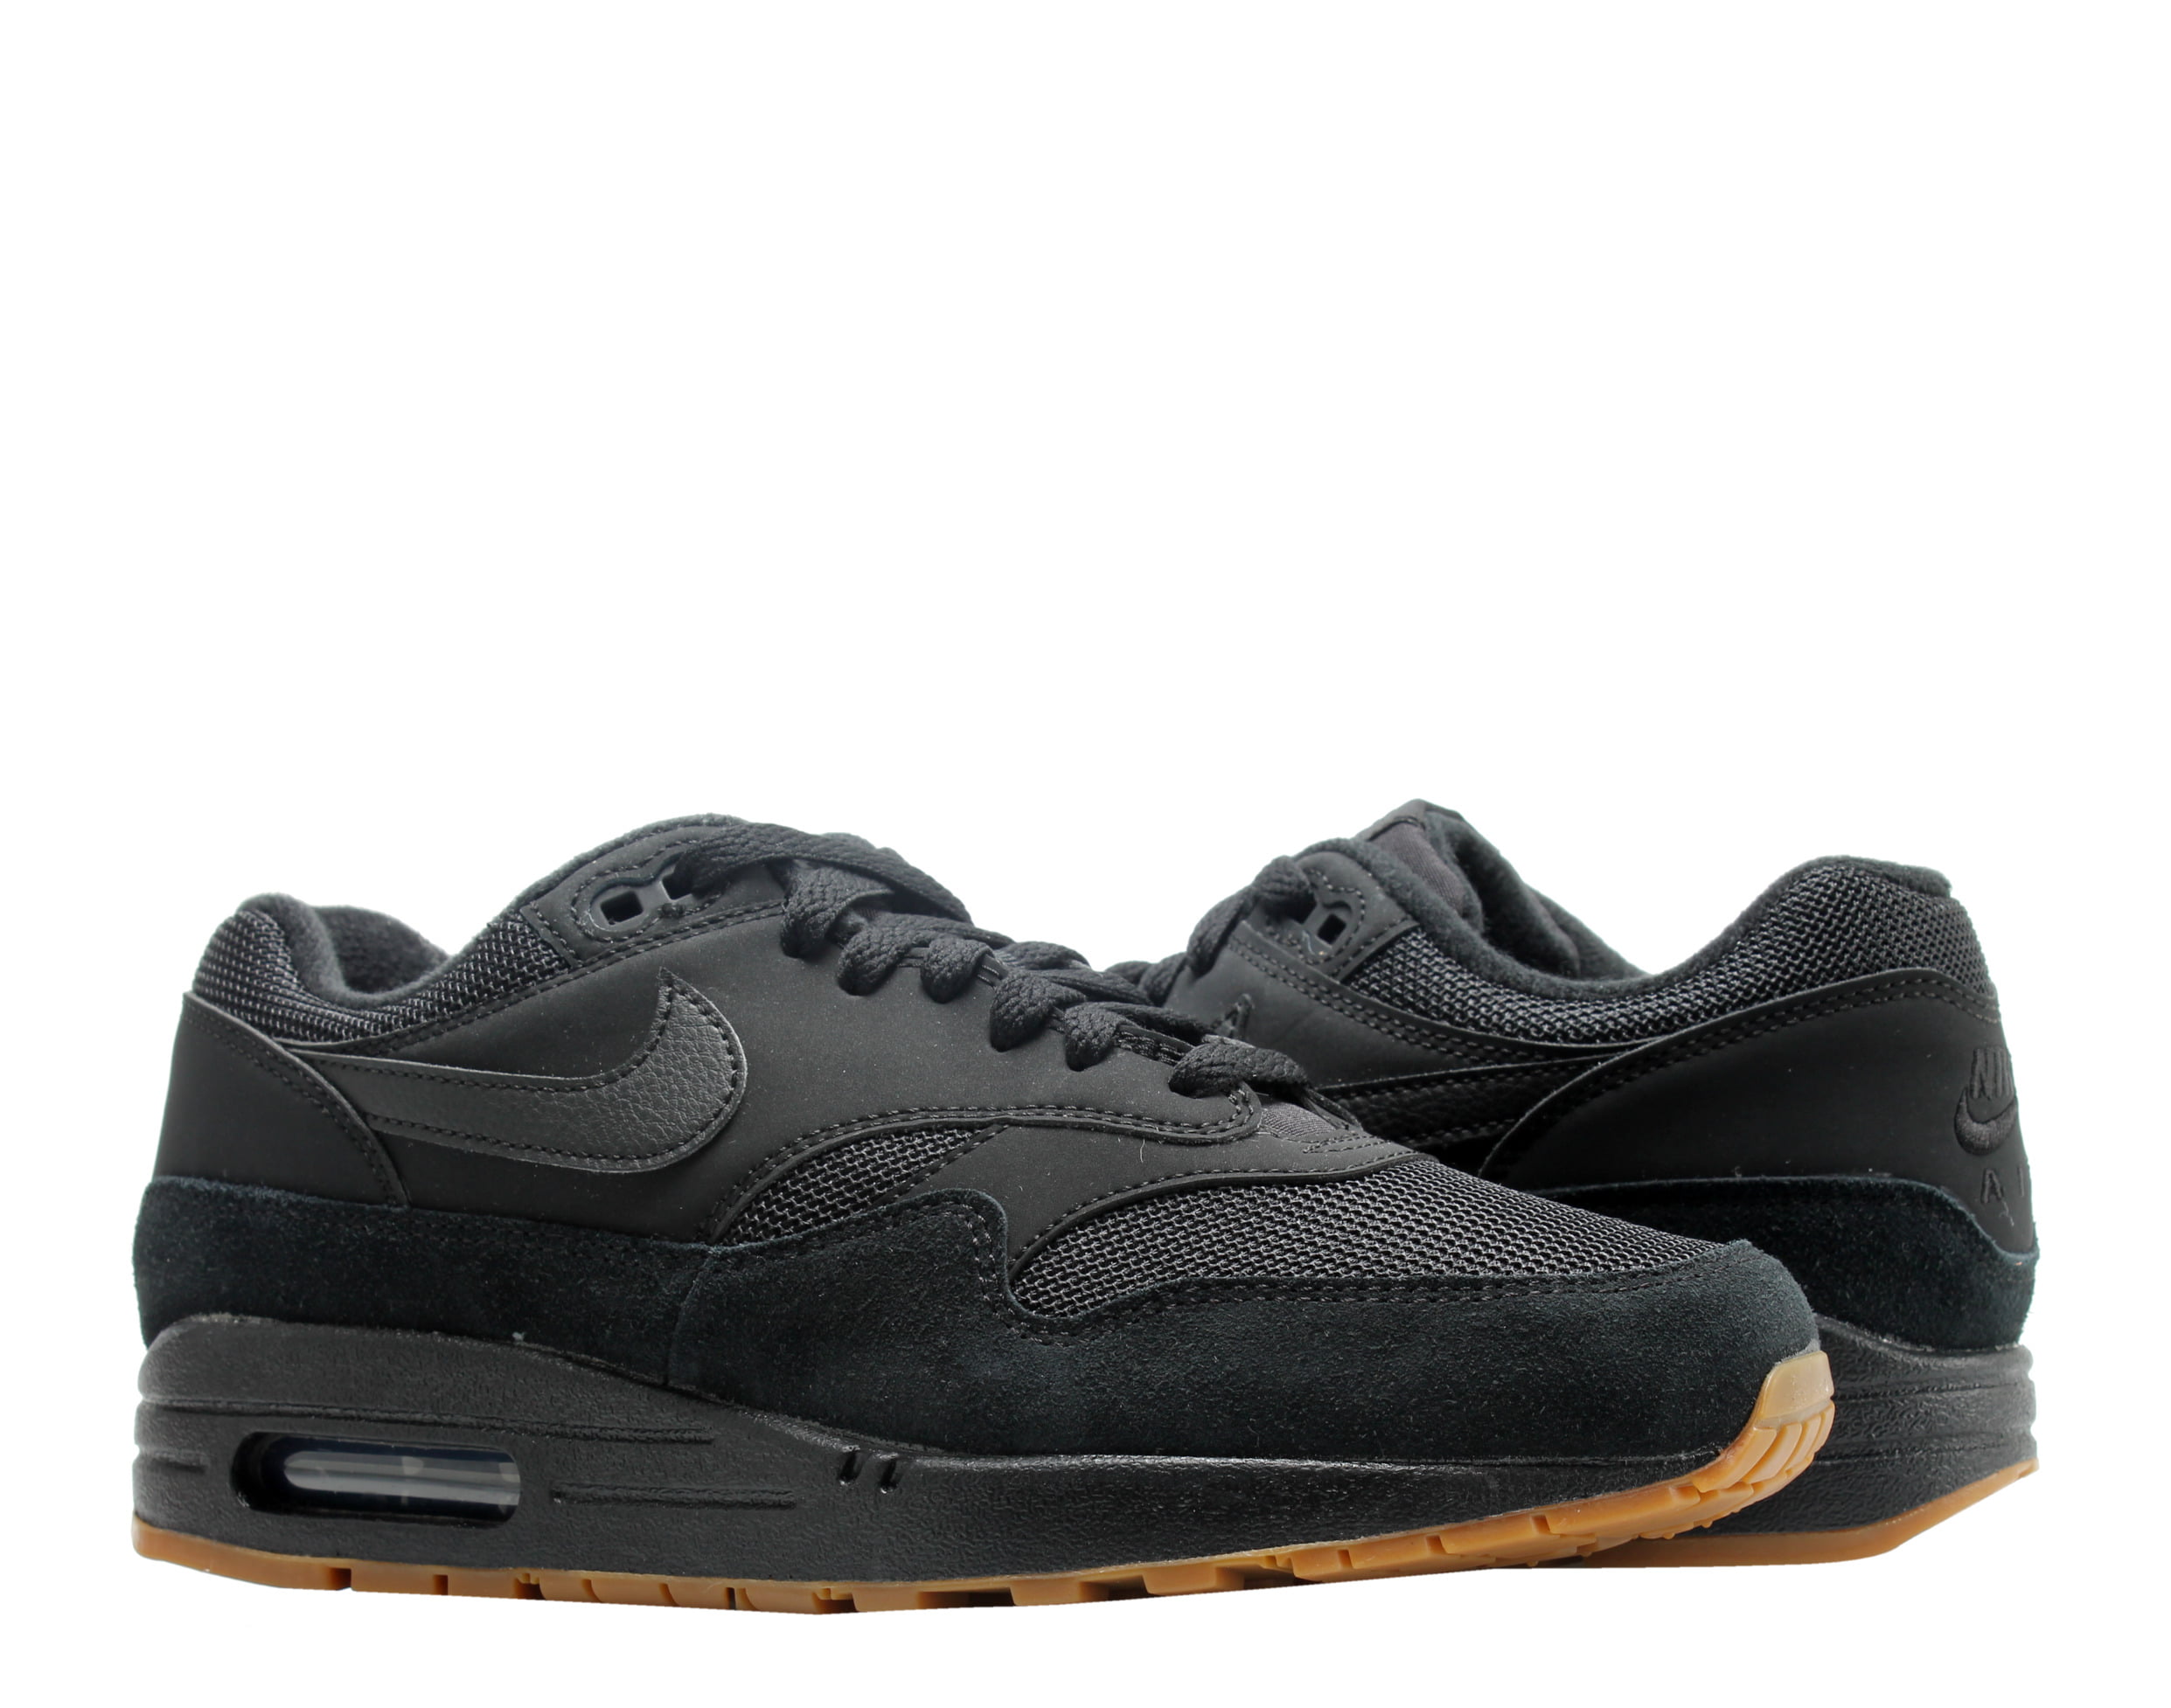 Nike Air Max 1 'USA' Shoes - Size 10.5